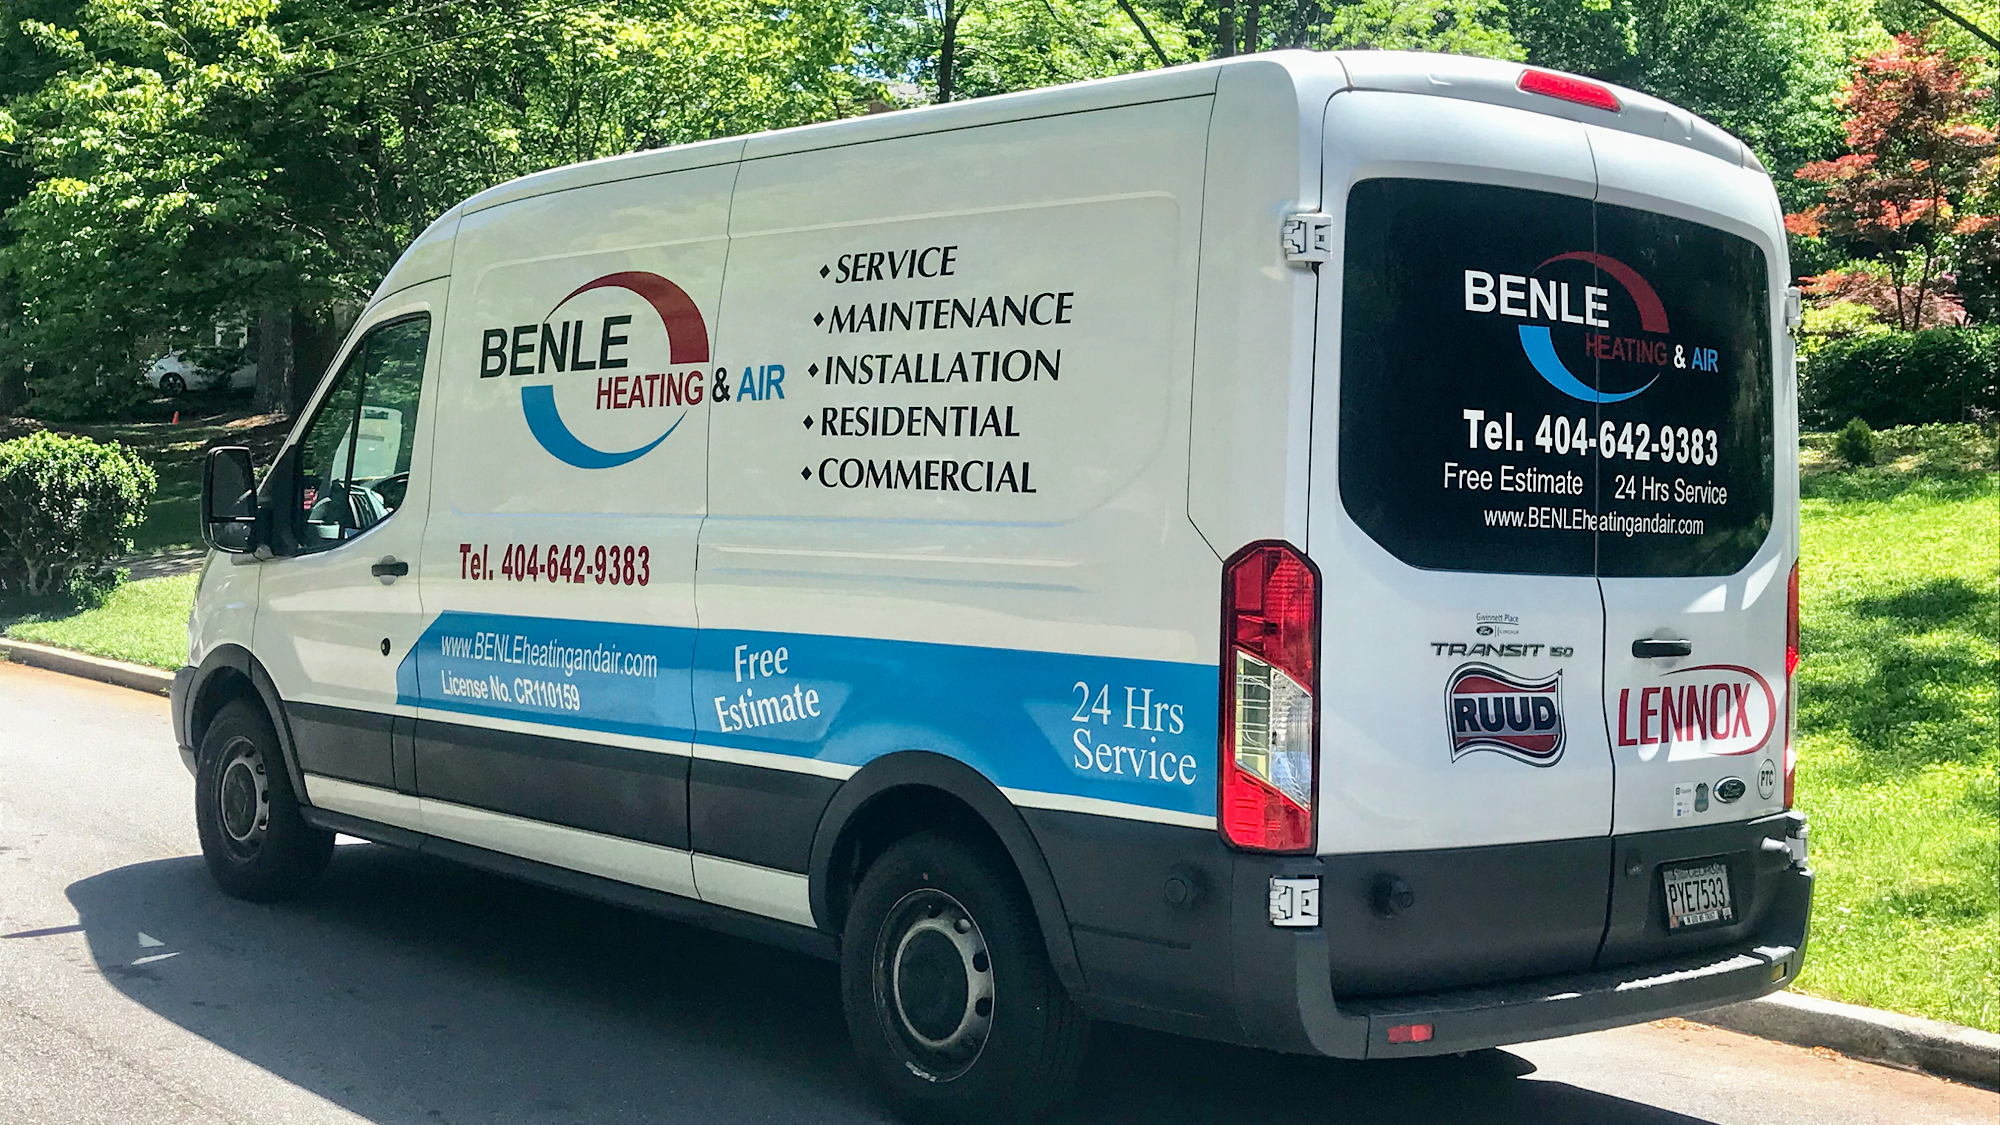 BenLe Heating and Air